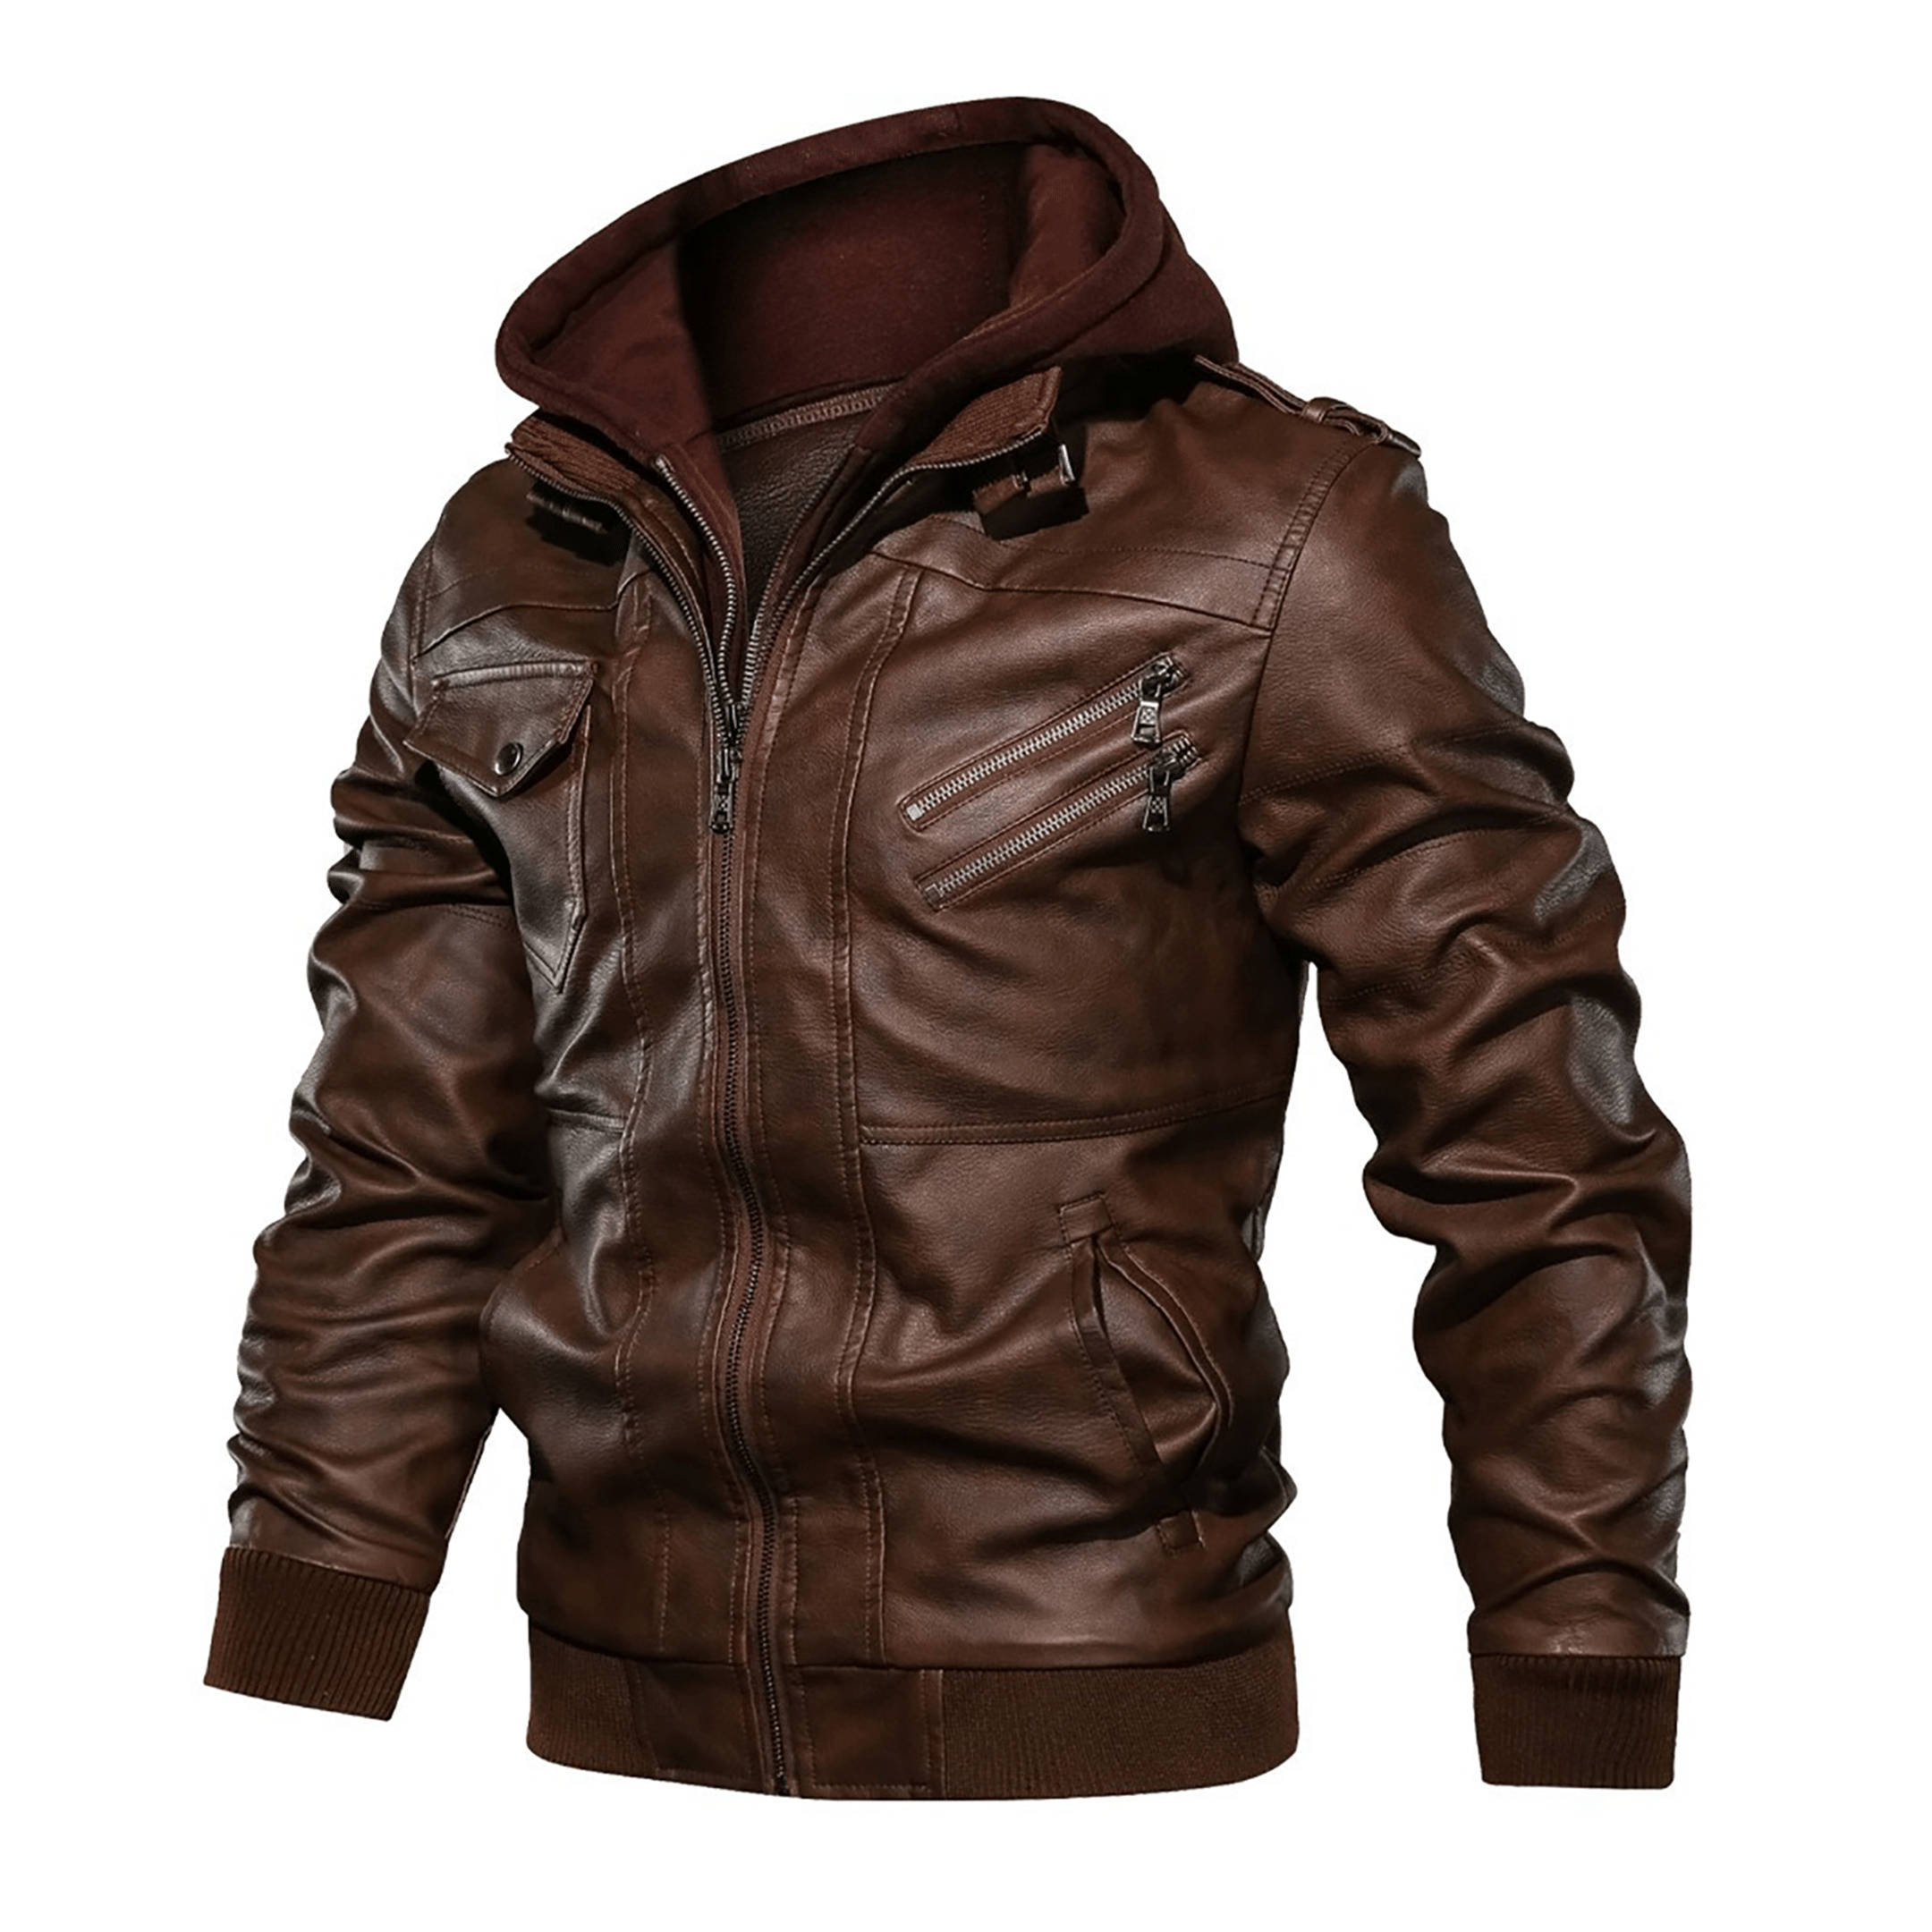 Top leather jackets and latest products 291